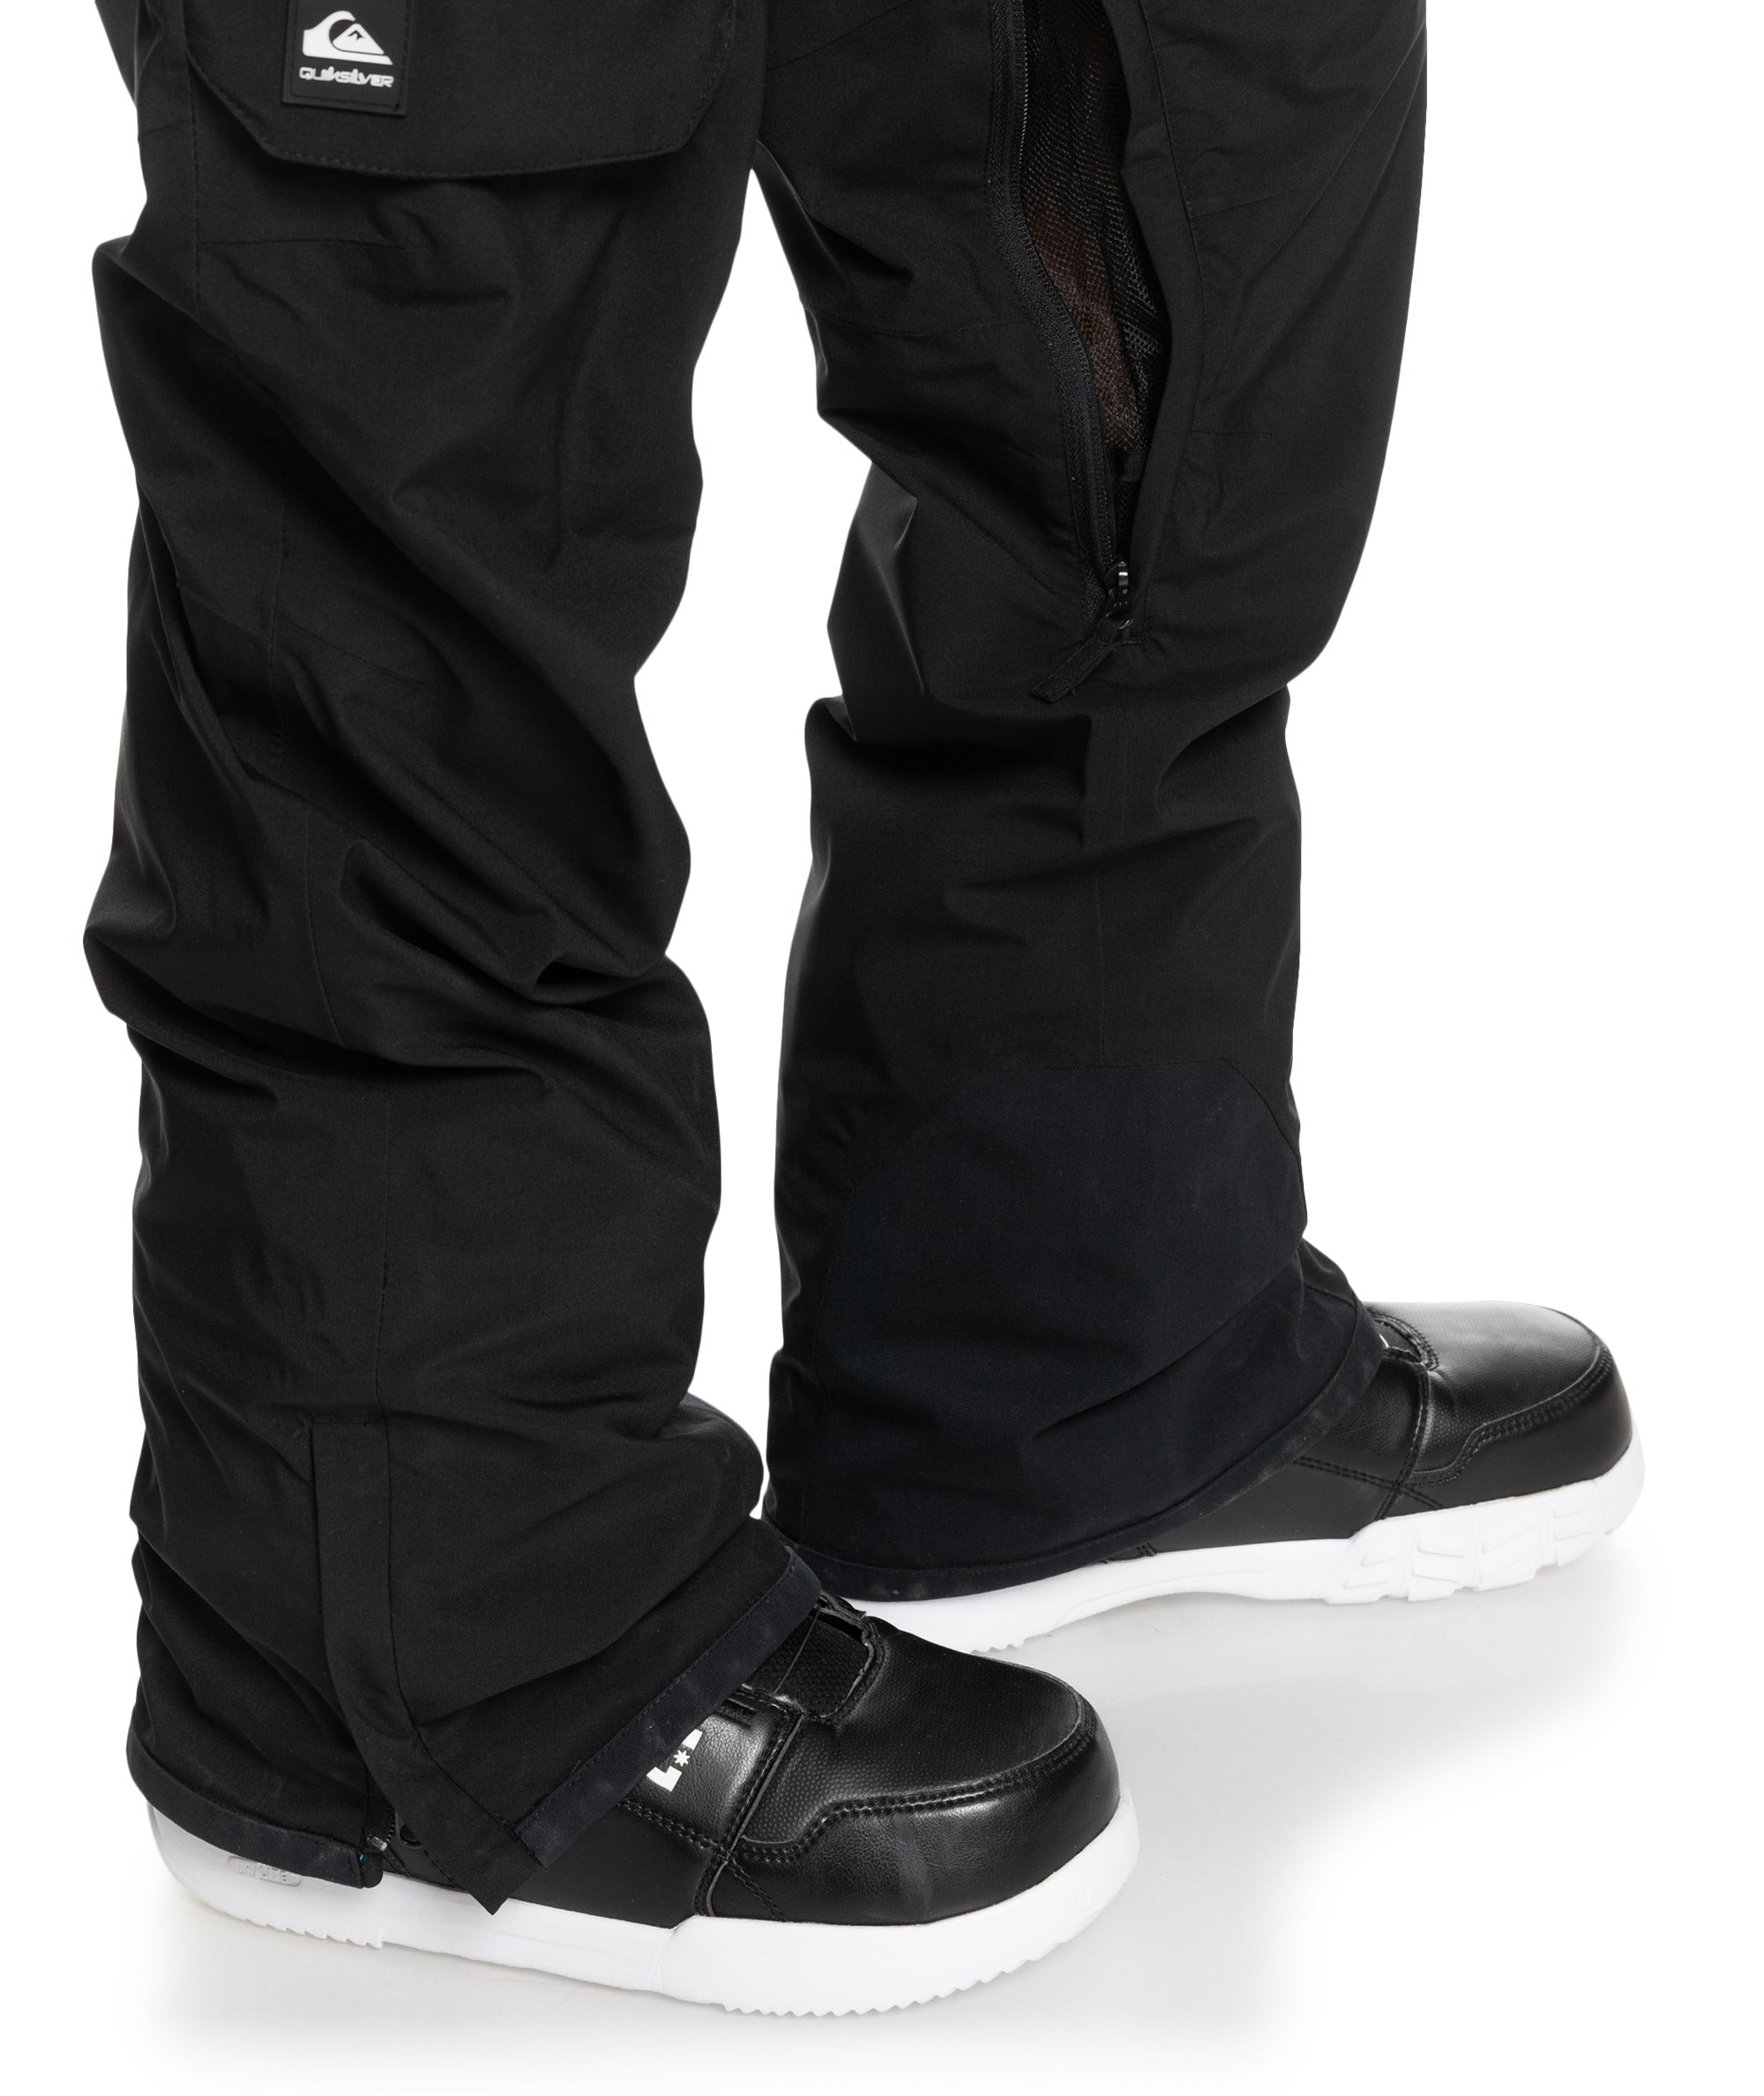 QuikSilver Utility Shell Snowboard Pants 2024